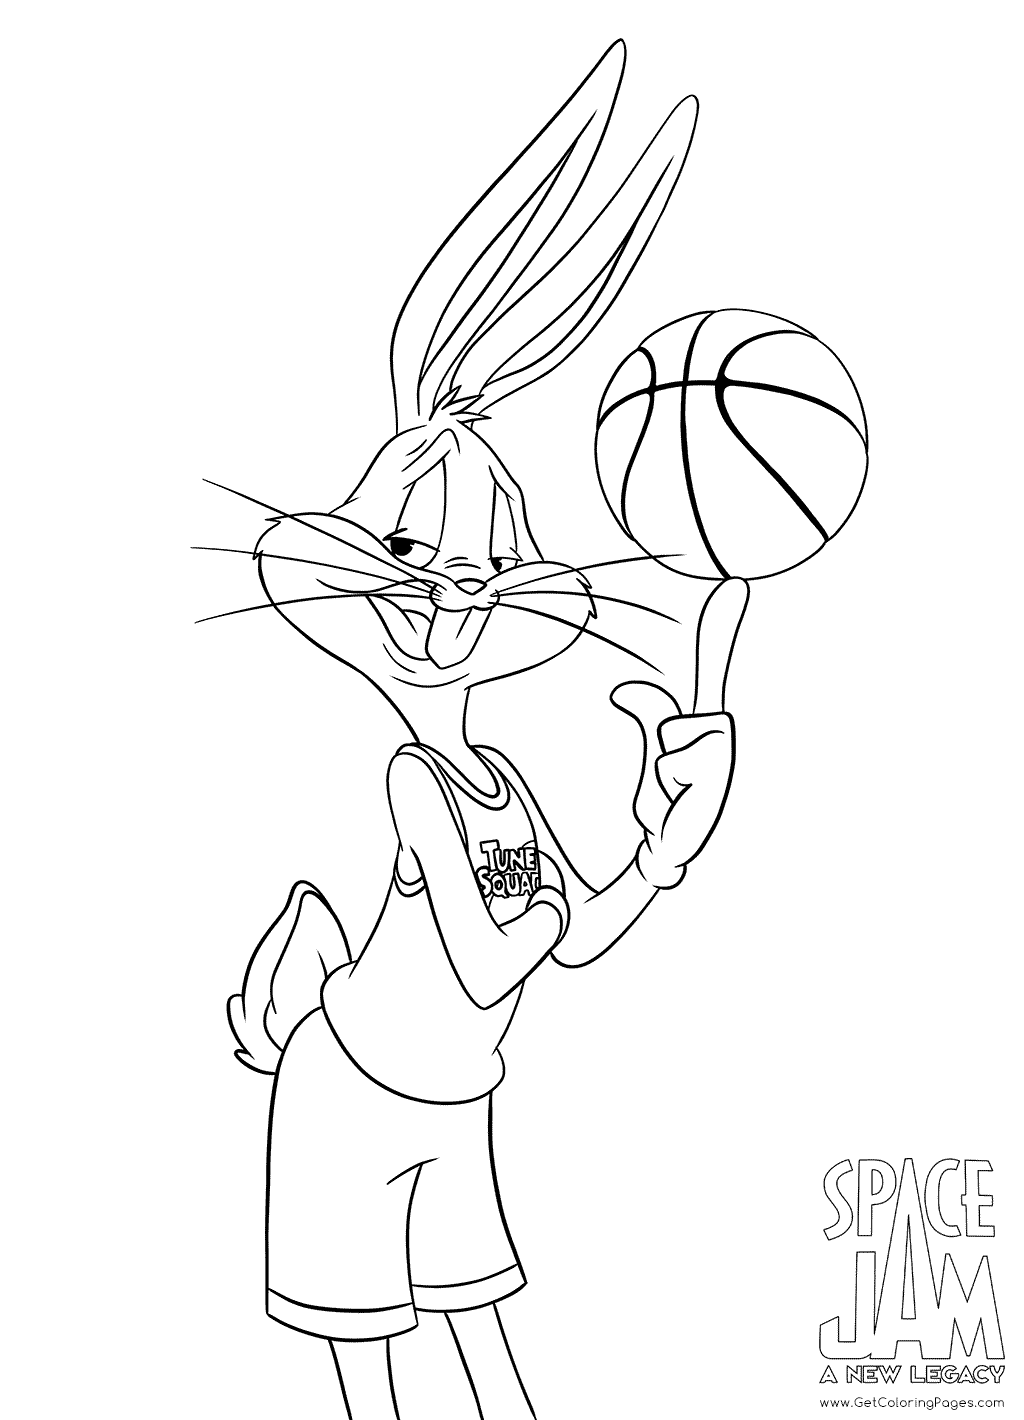 Bugs Bunny Space Jam 2 Coloring Pages - Get Coloring Pages